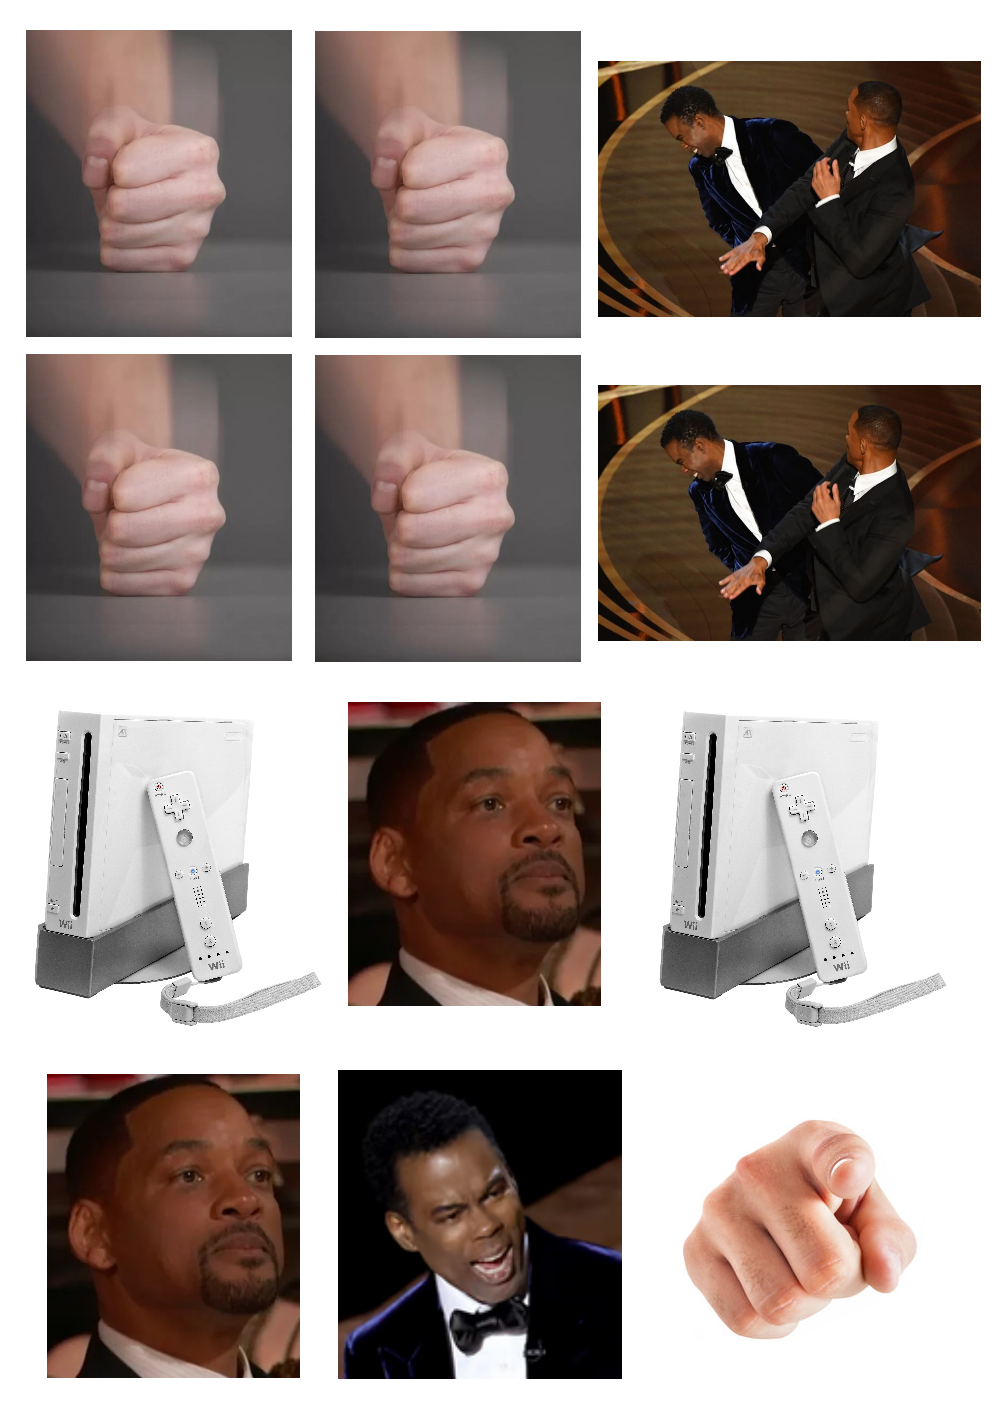 Me being very original by making a Will Smith meme: